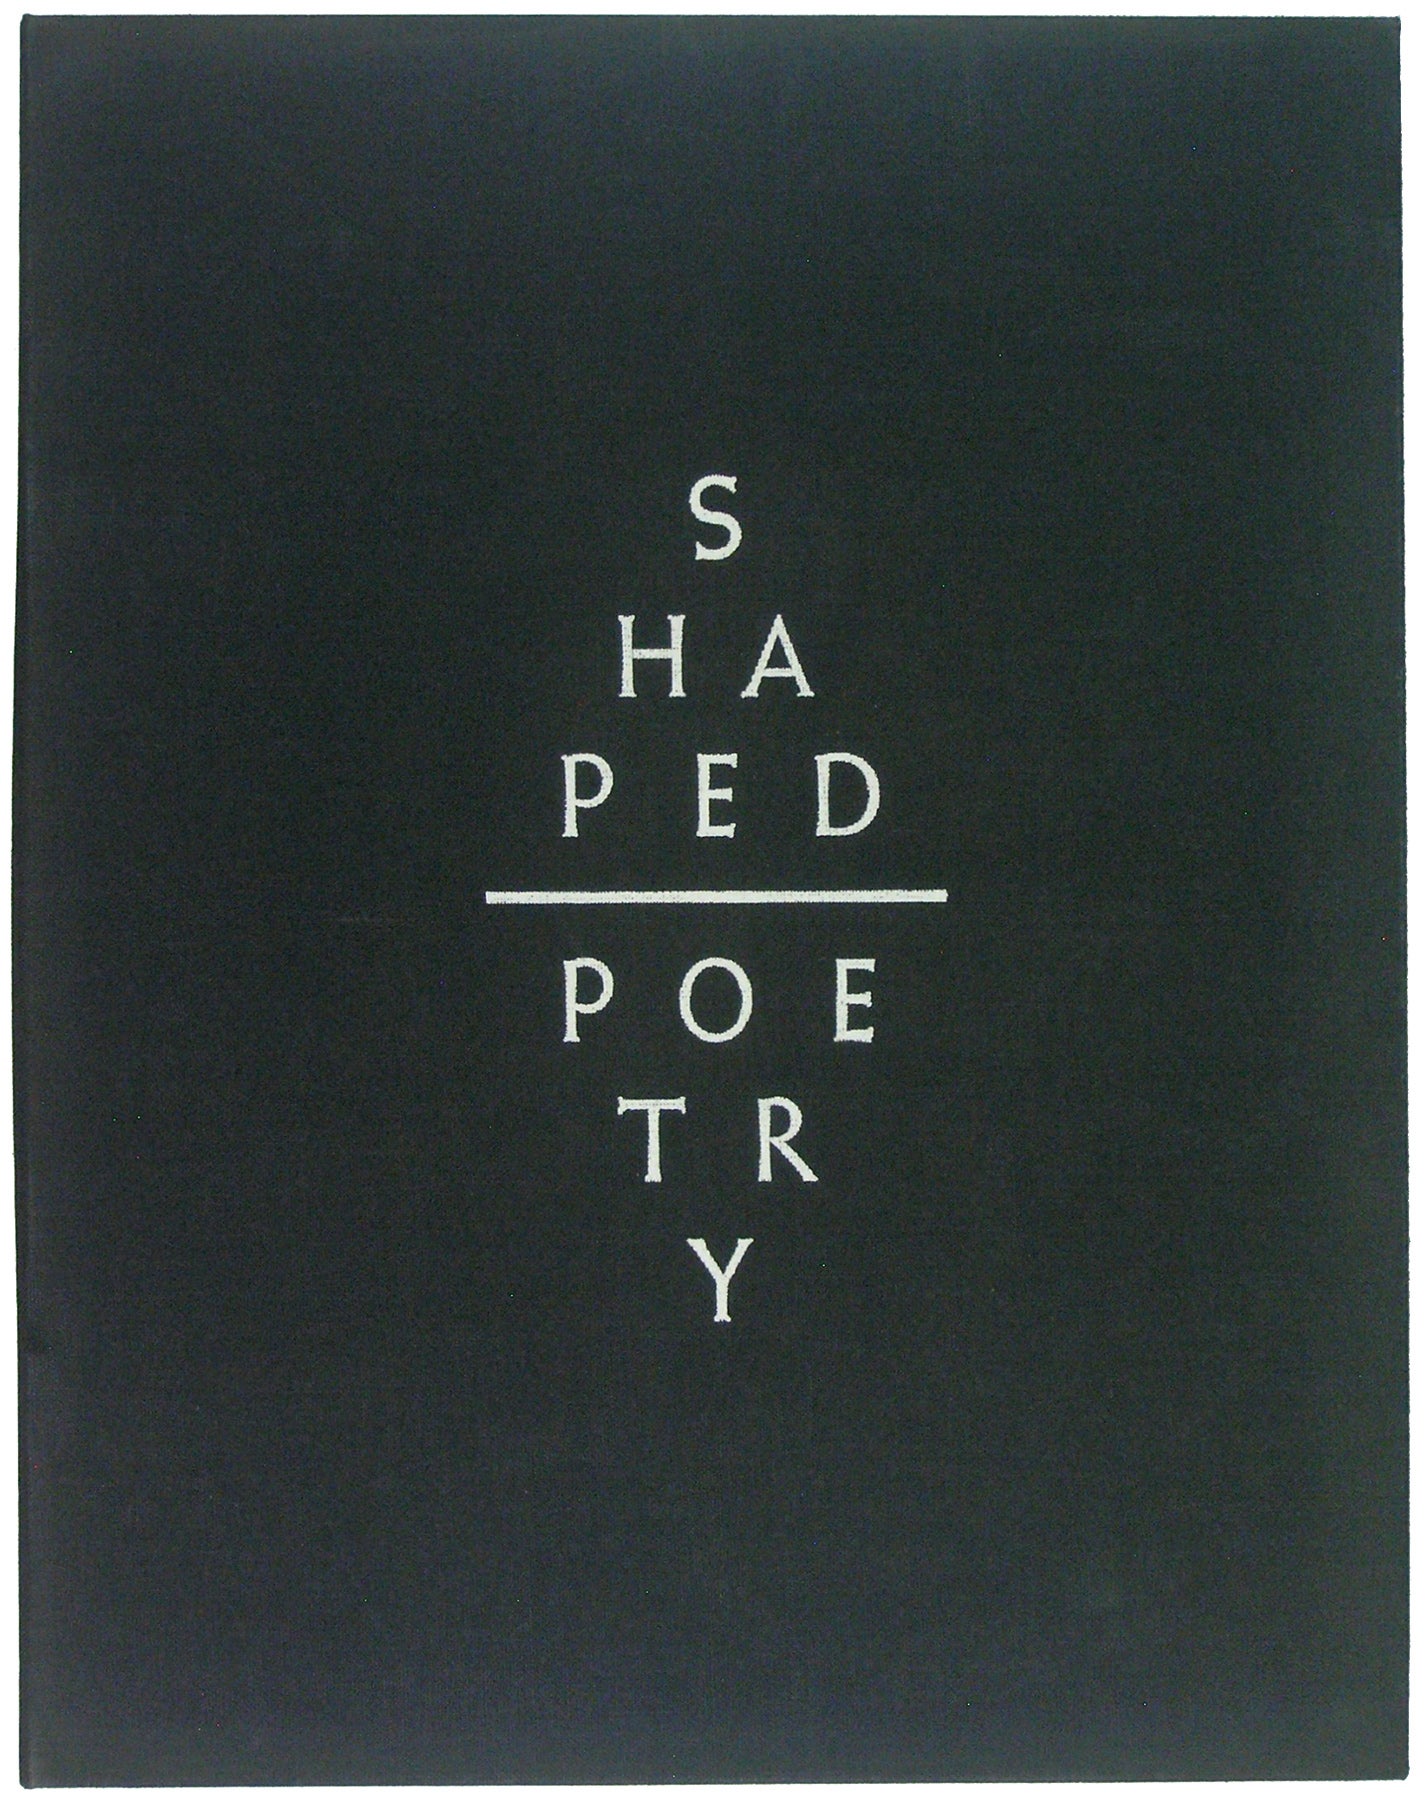 [Arion Press]. Todd, Glenn. Hoyem, Andrew - Shaped Poetry. A Suite of 30 Typographic Prints Chronicling This Literary Form from 300 Bc to the Present